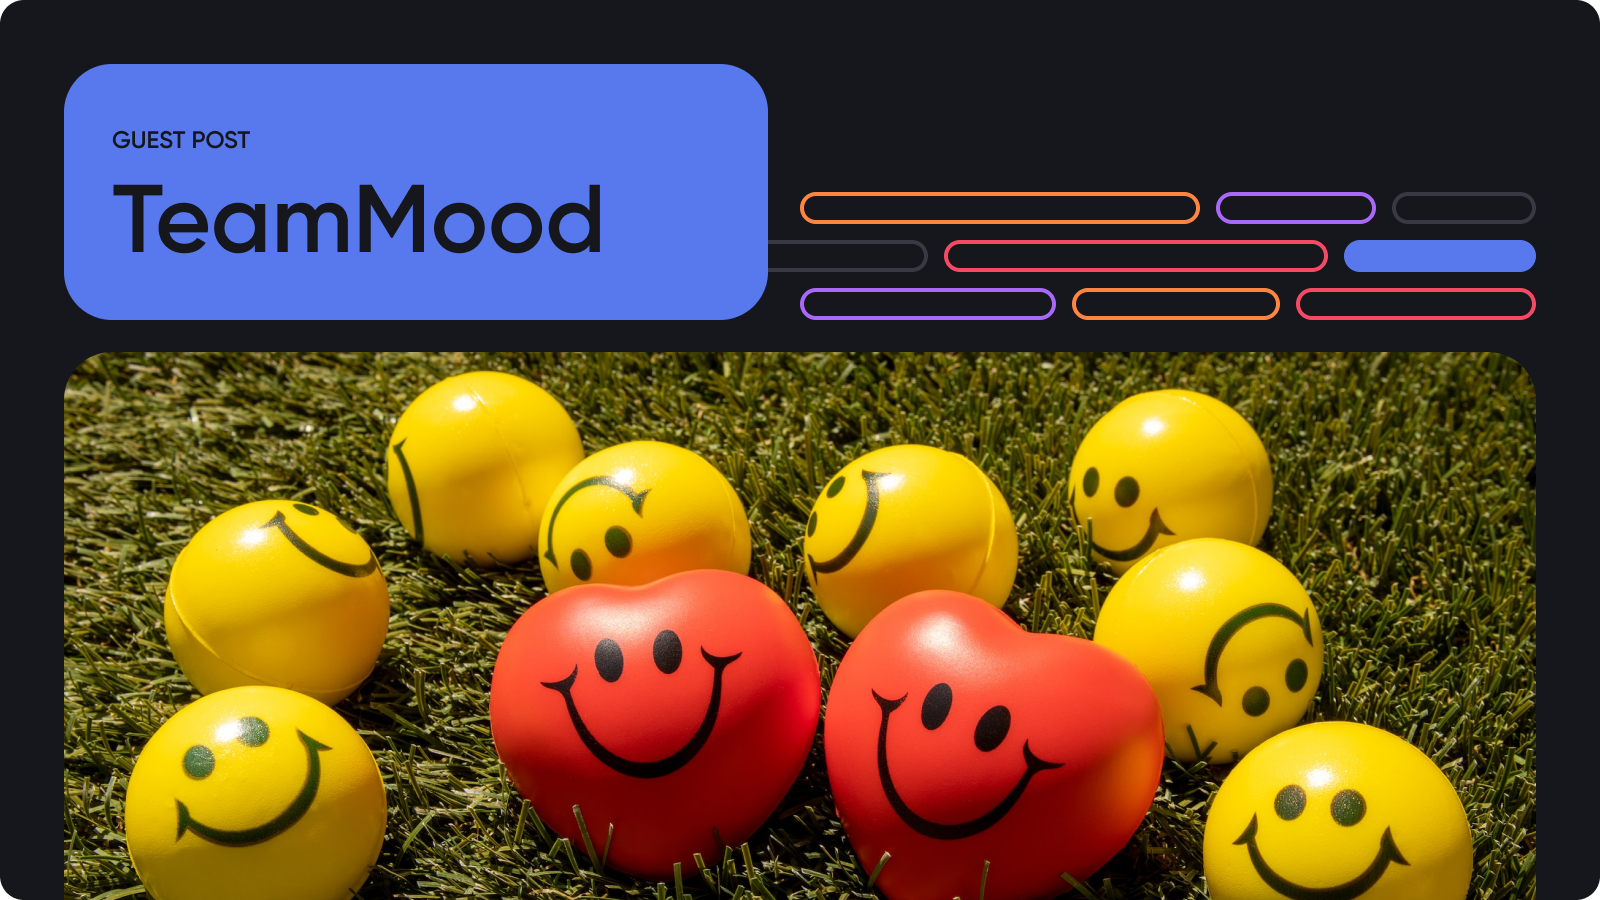 TeamMood guest post at oboard.io